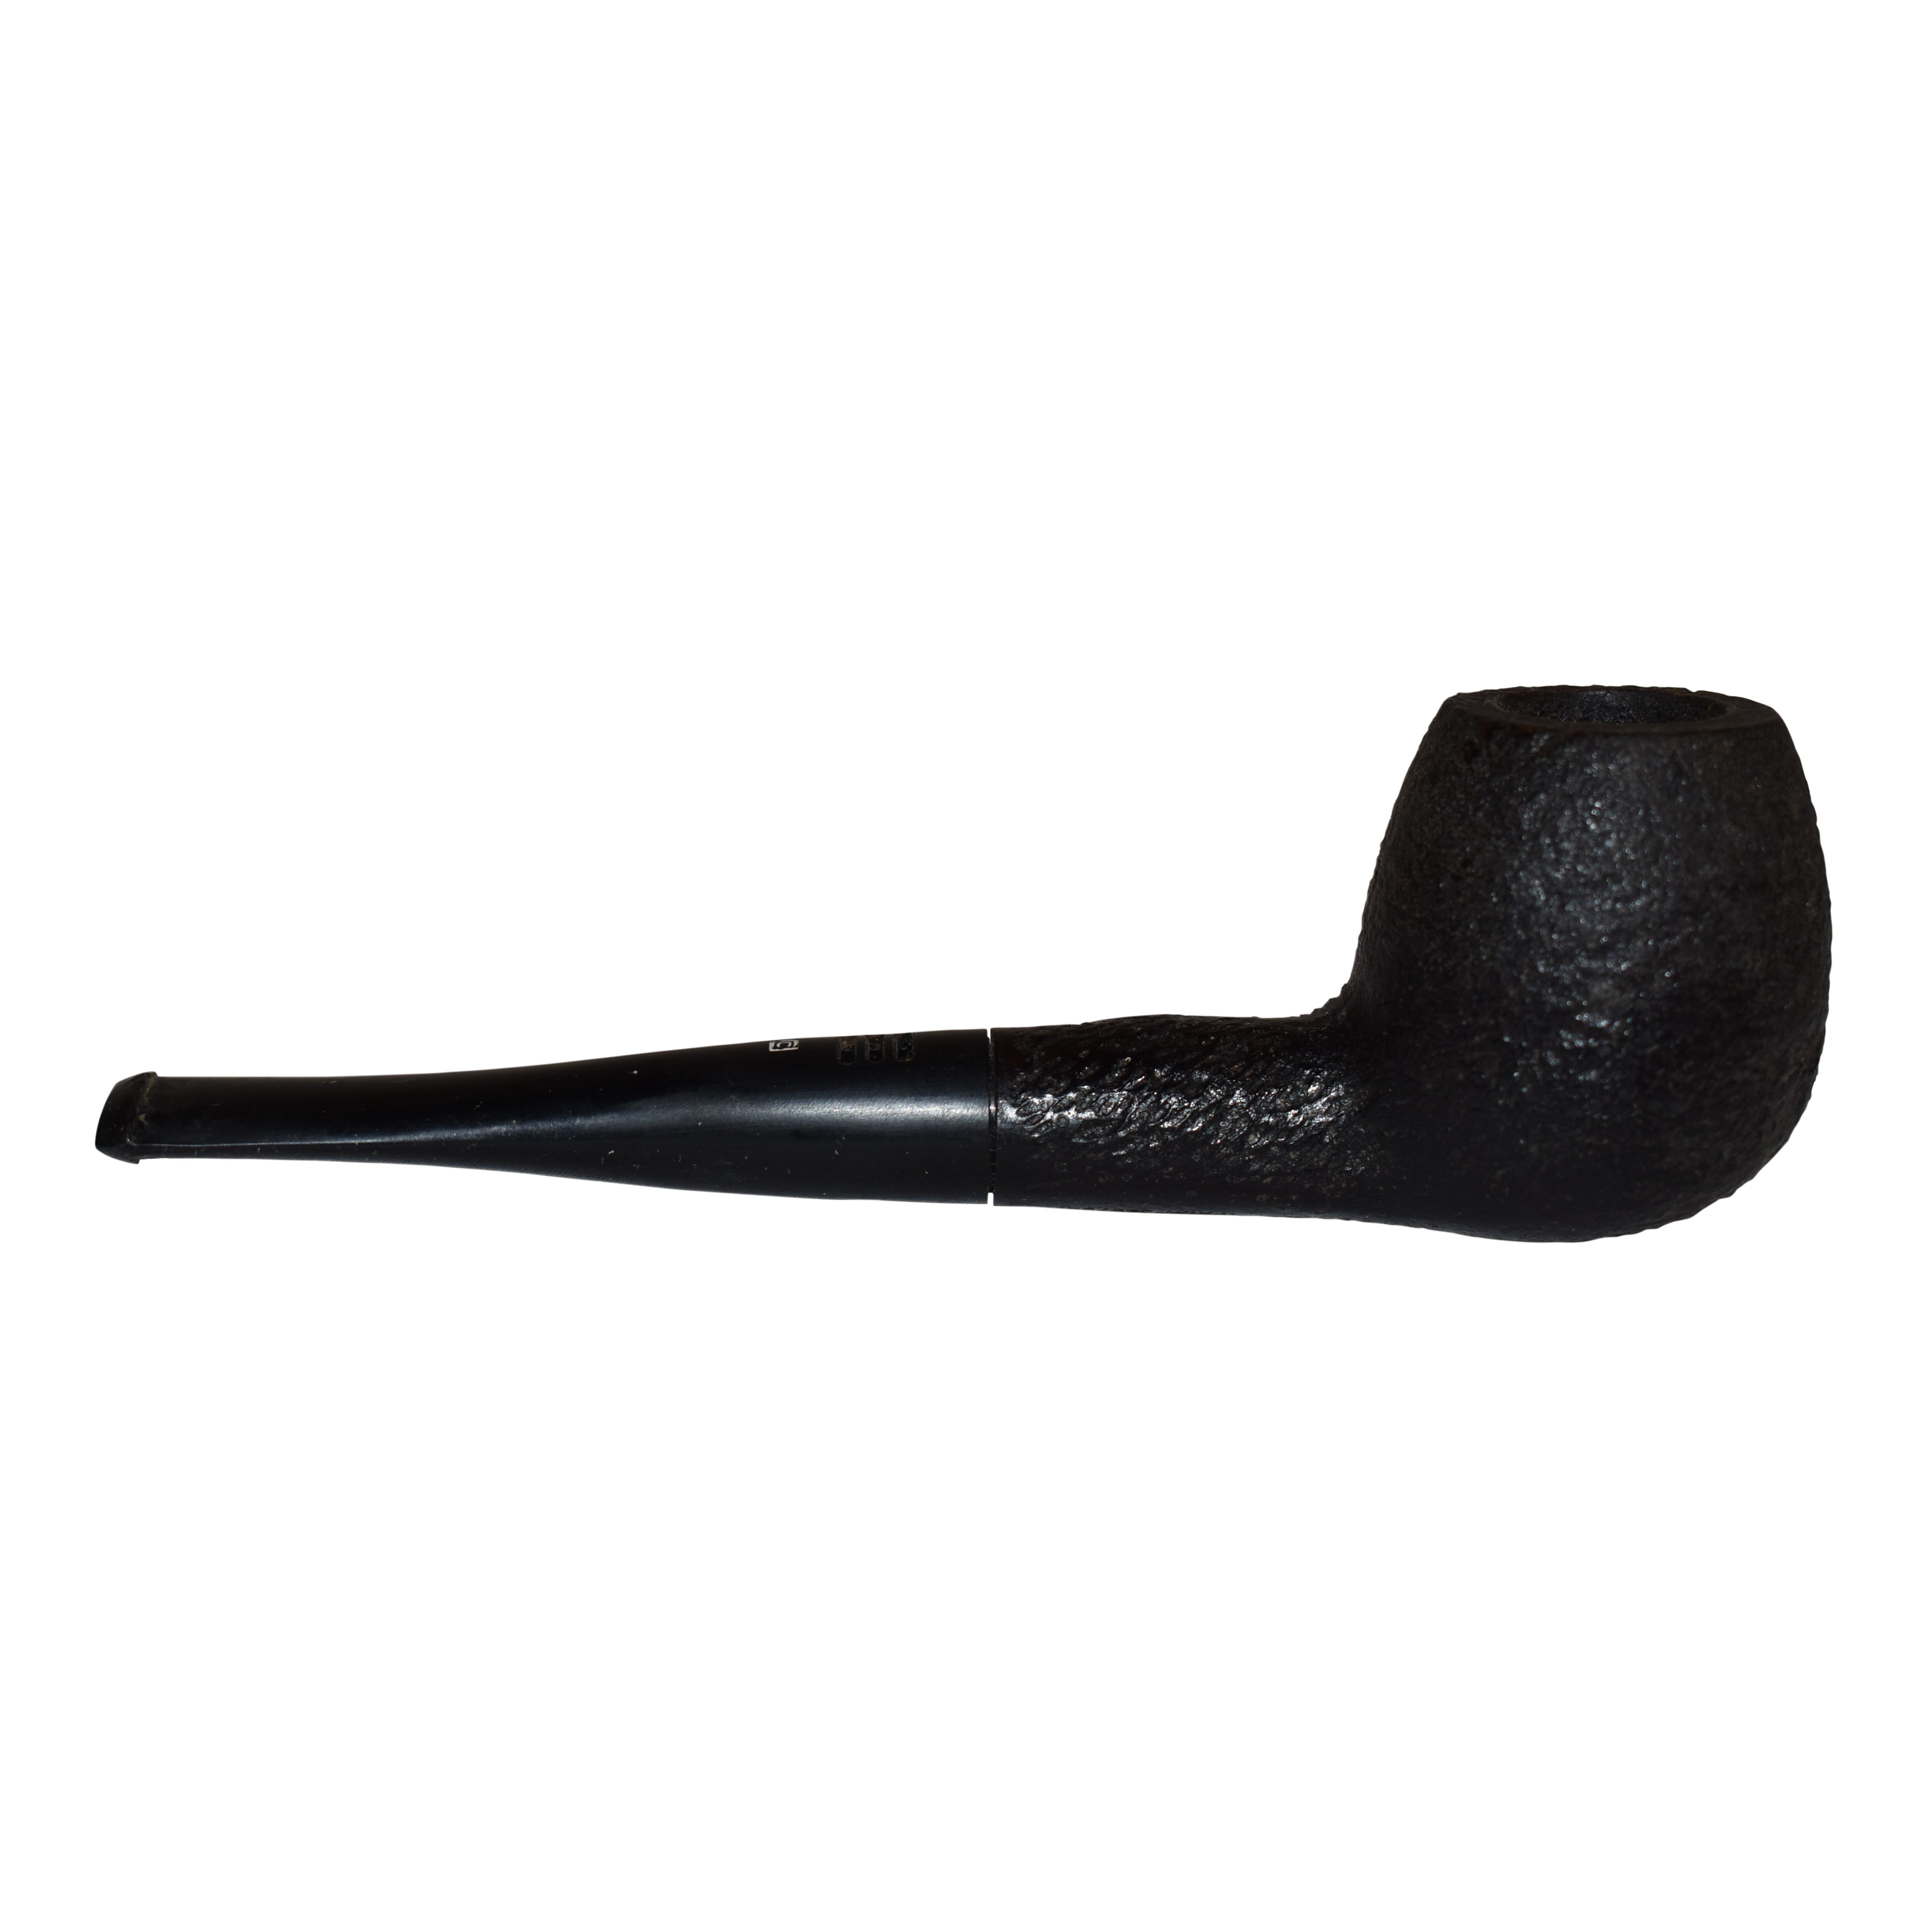 Textured Tobacco Pipe